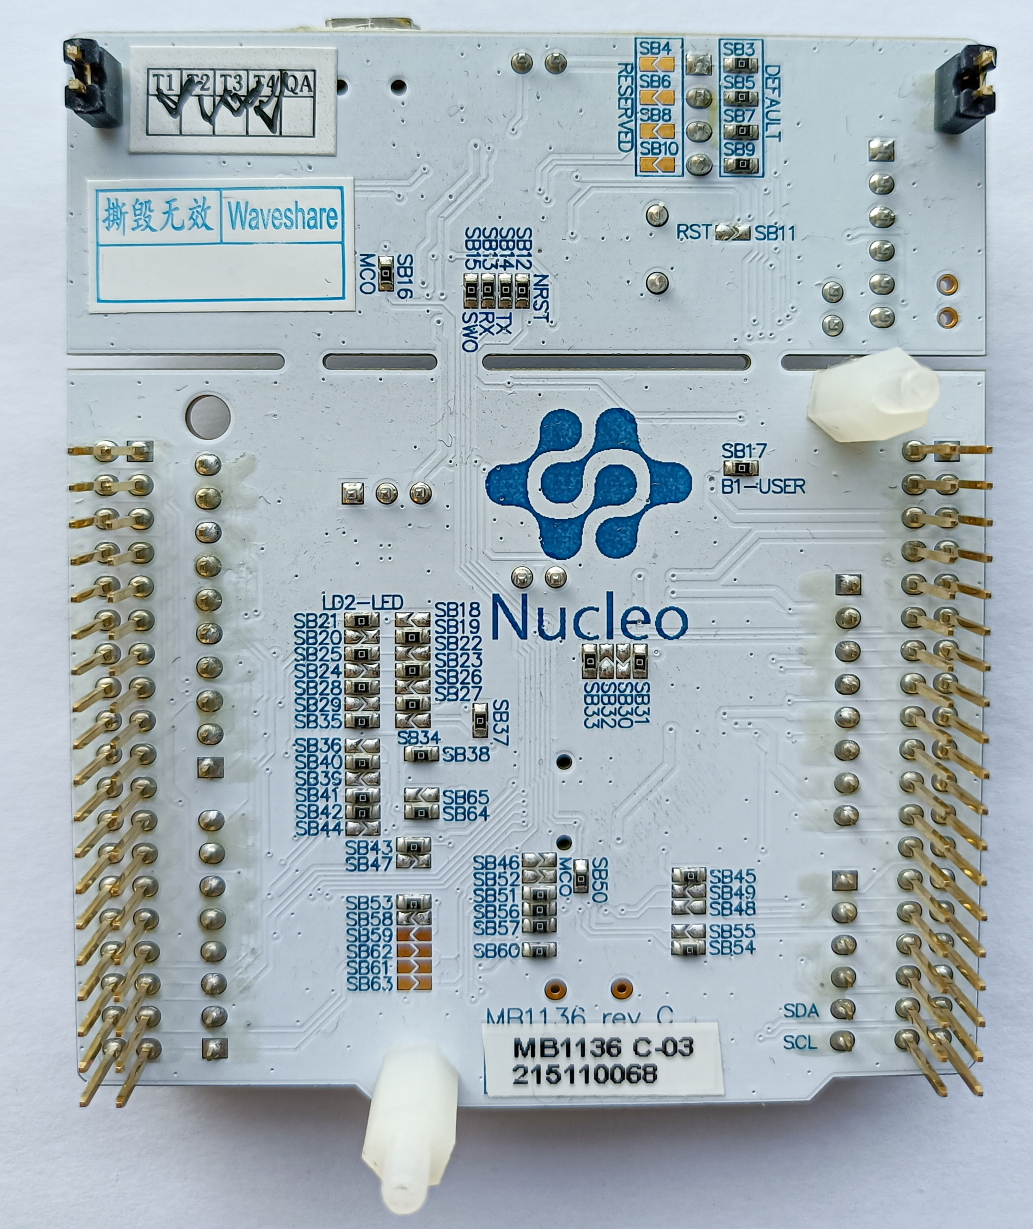 STM32 Nucleo F411RE